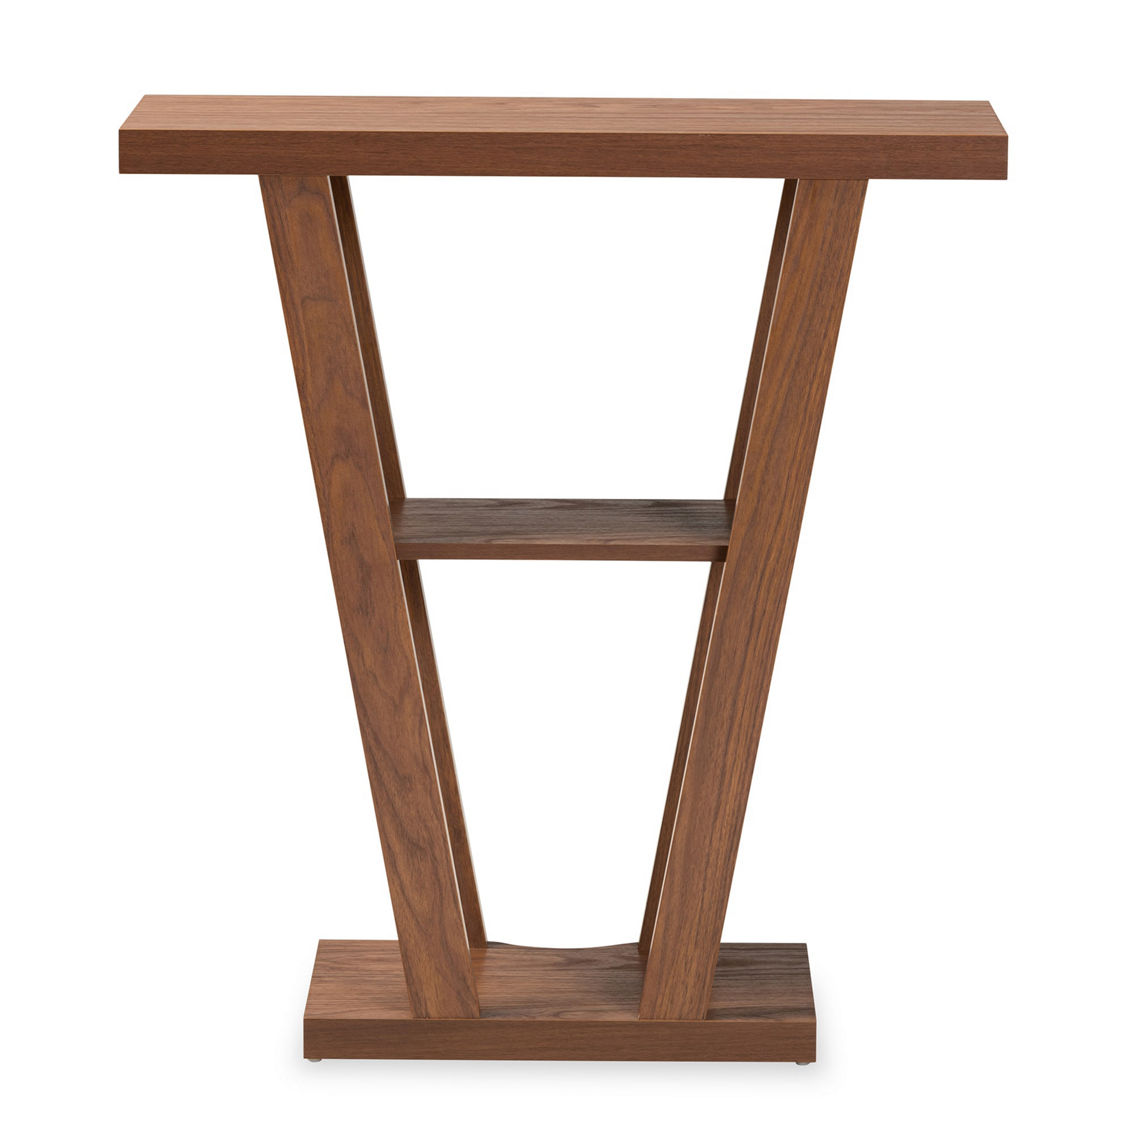 Baxton Studio Boone Walnut Brown Finished Wood Console Table - Image 4 of 5